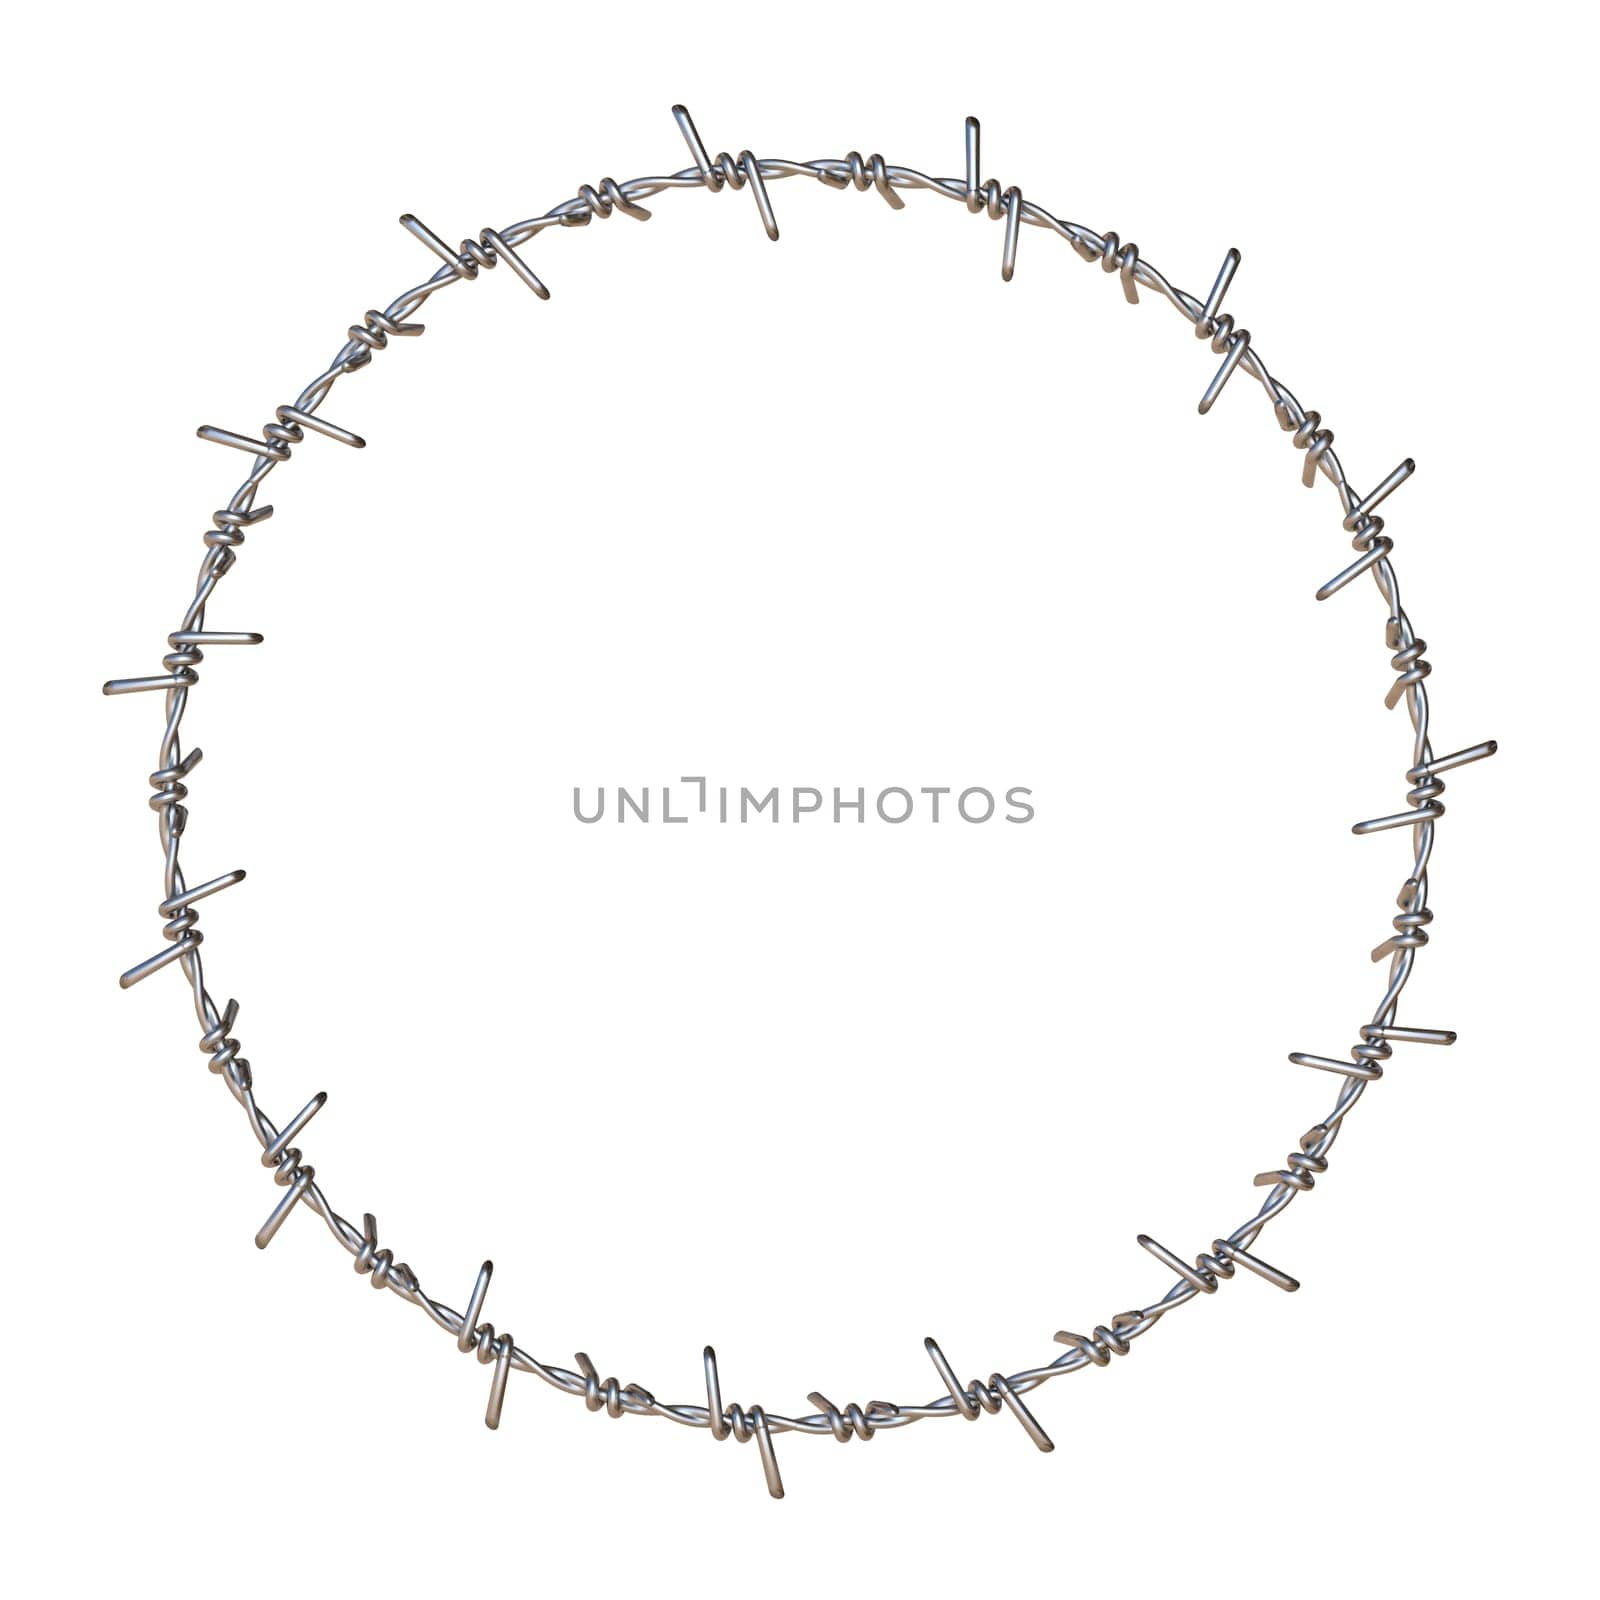 Barbed wire Big circle 3D rendering illustration isolated on white background